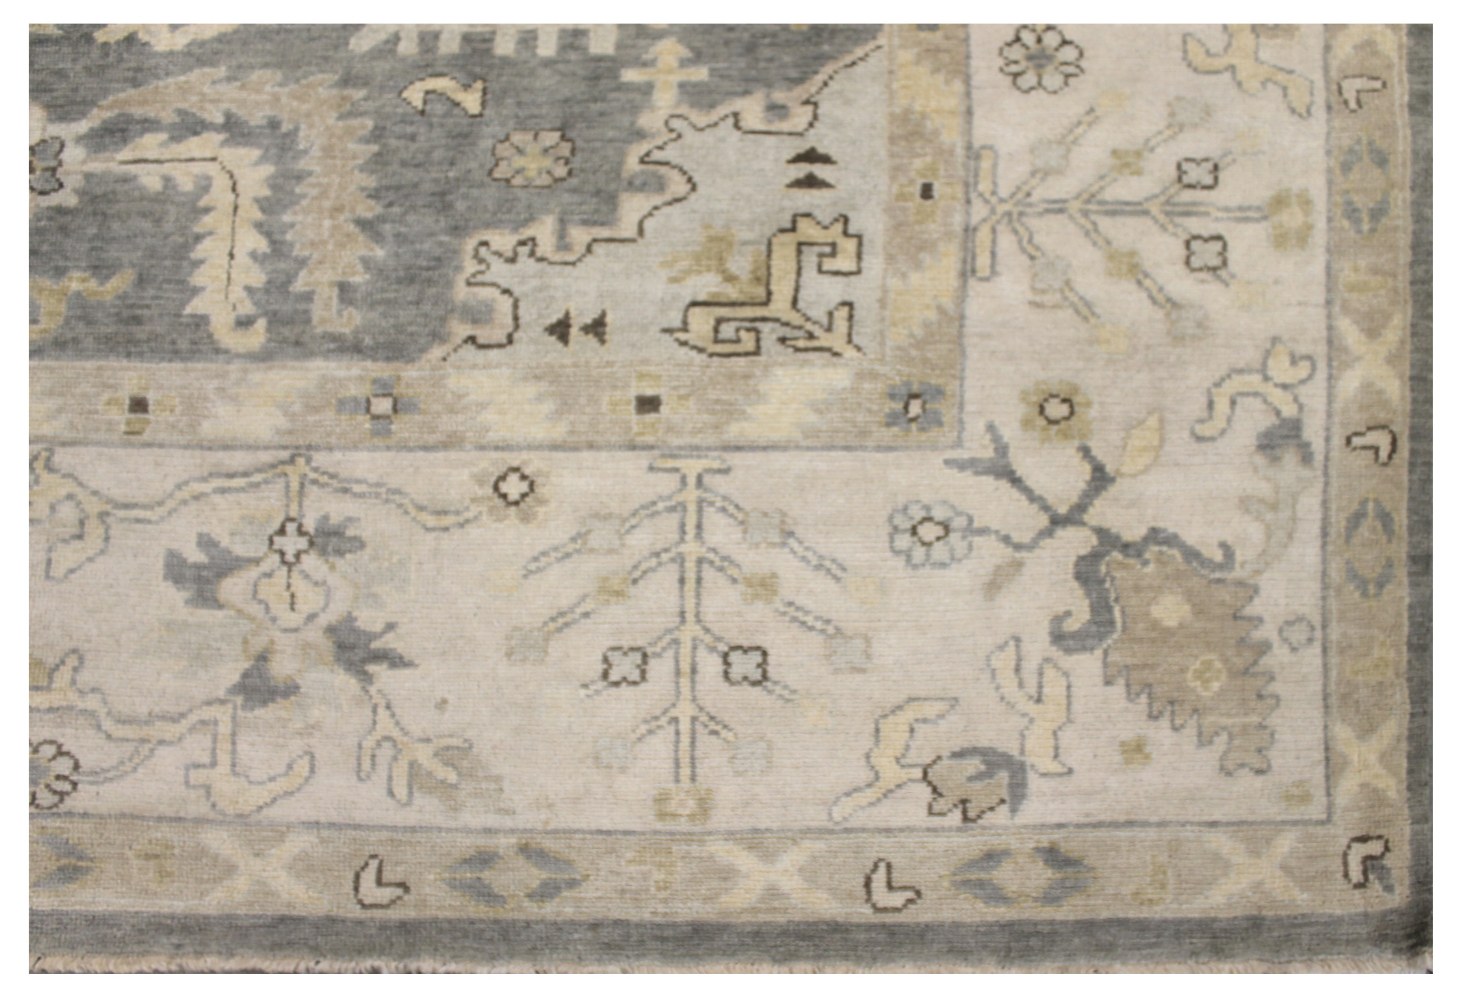 9x12 Oushak Hand Knotted Wool Area Rug - MR028503